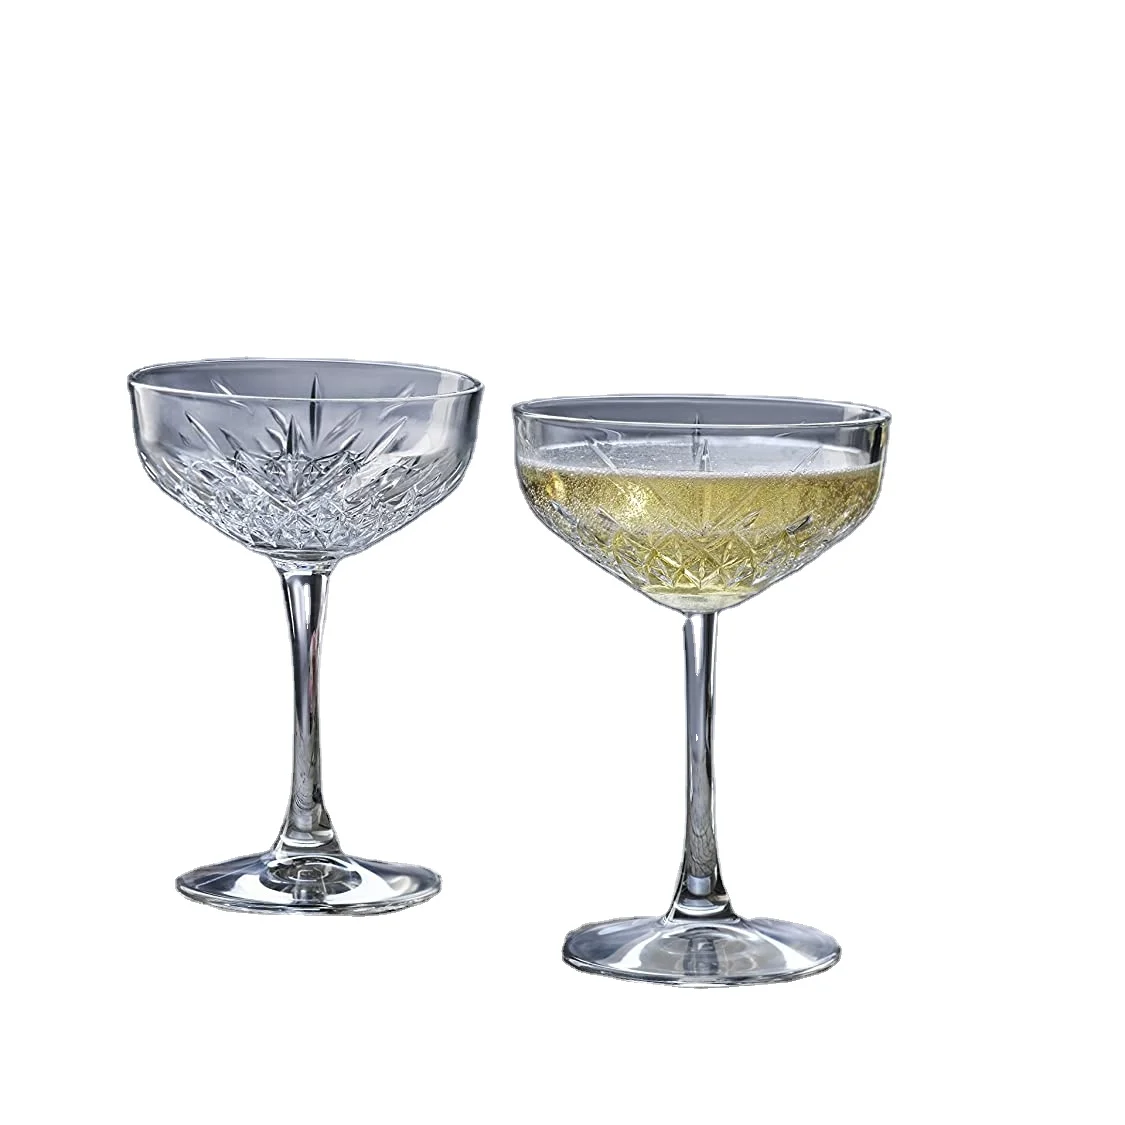 Pasabahce Cocktail Glasses,Timeless Champagne Glasses - Crystal Design Buy Glasses,Wine Glass,Cocktail Glasses Product Alibaba.com